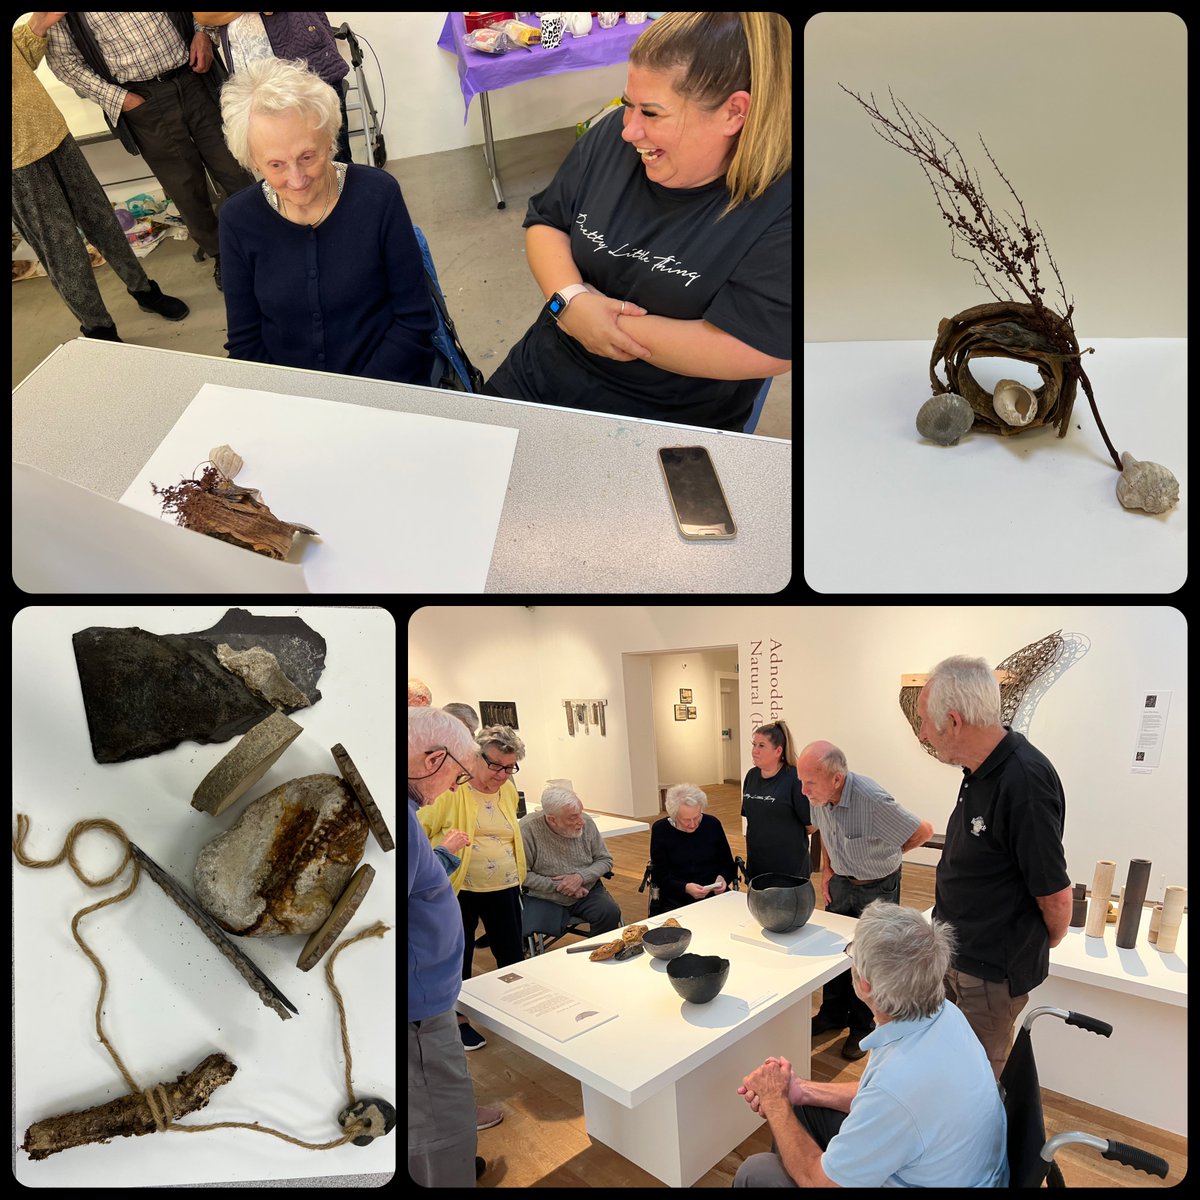 Lovely to welcome our Lost in Art gang back into the gallery @Ruthin_Crafts after the summer break #LivingWellWithDementia #CreativeWellbeing